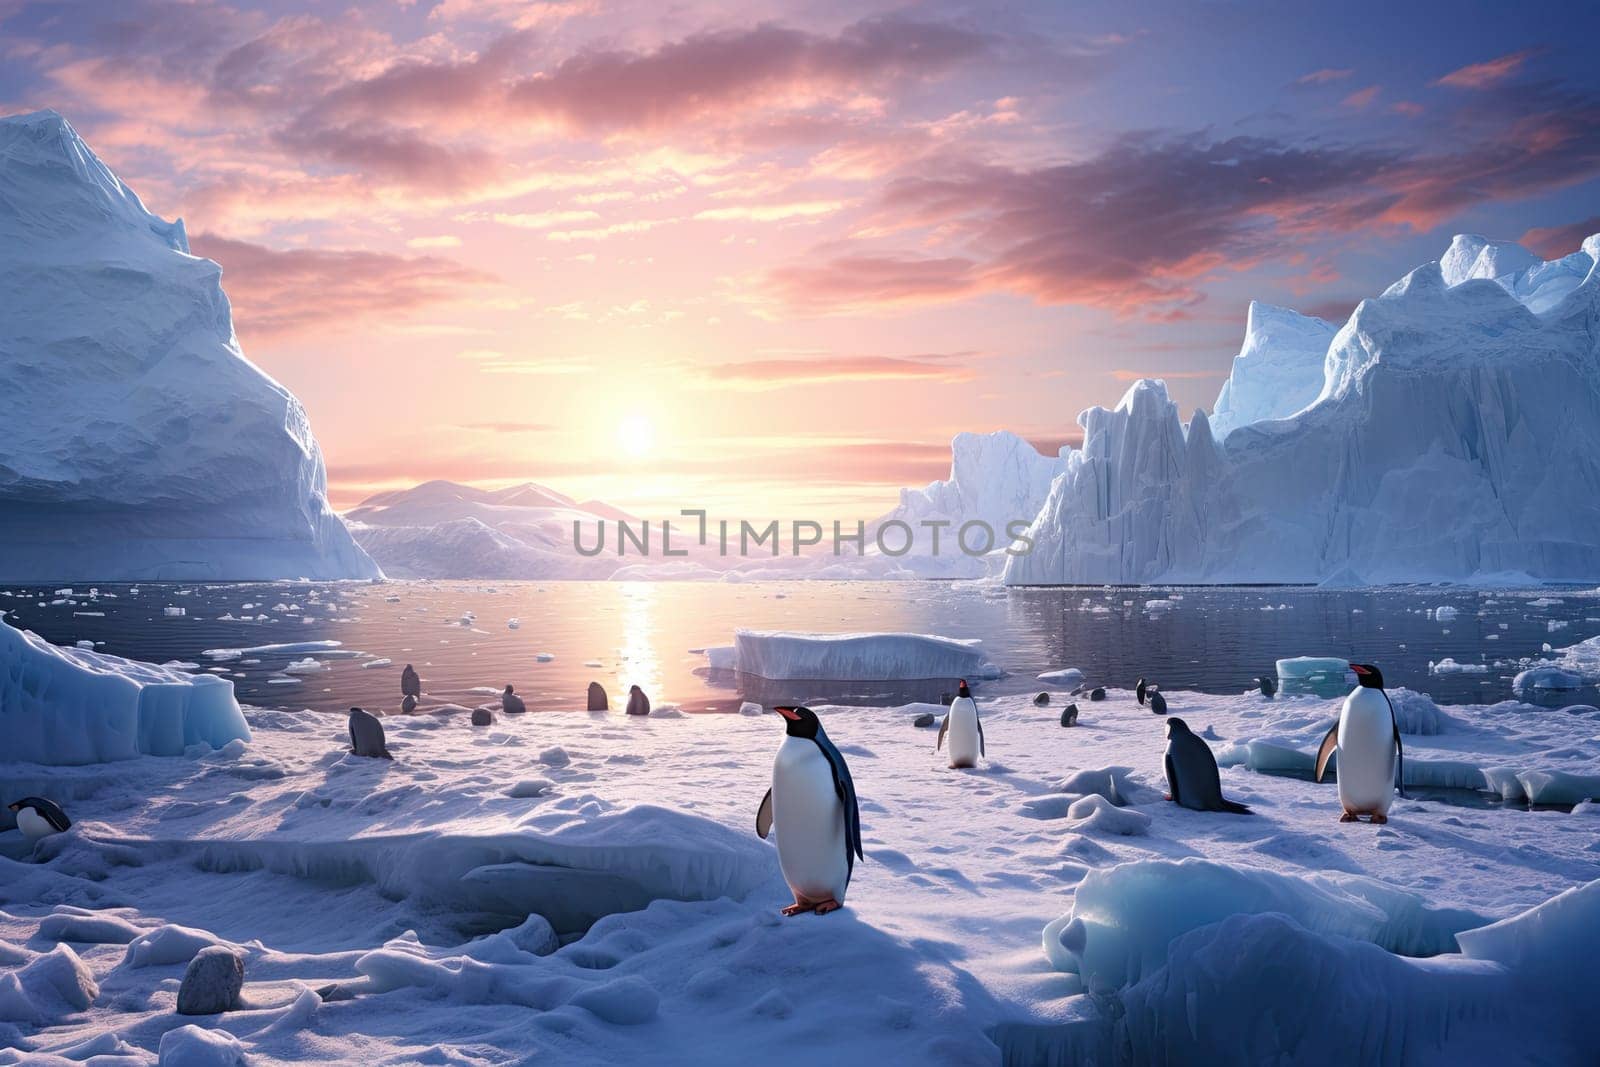 penguins on an iceberg in the water at sunset or dawn by papatonic